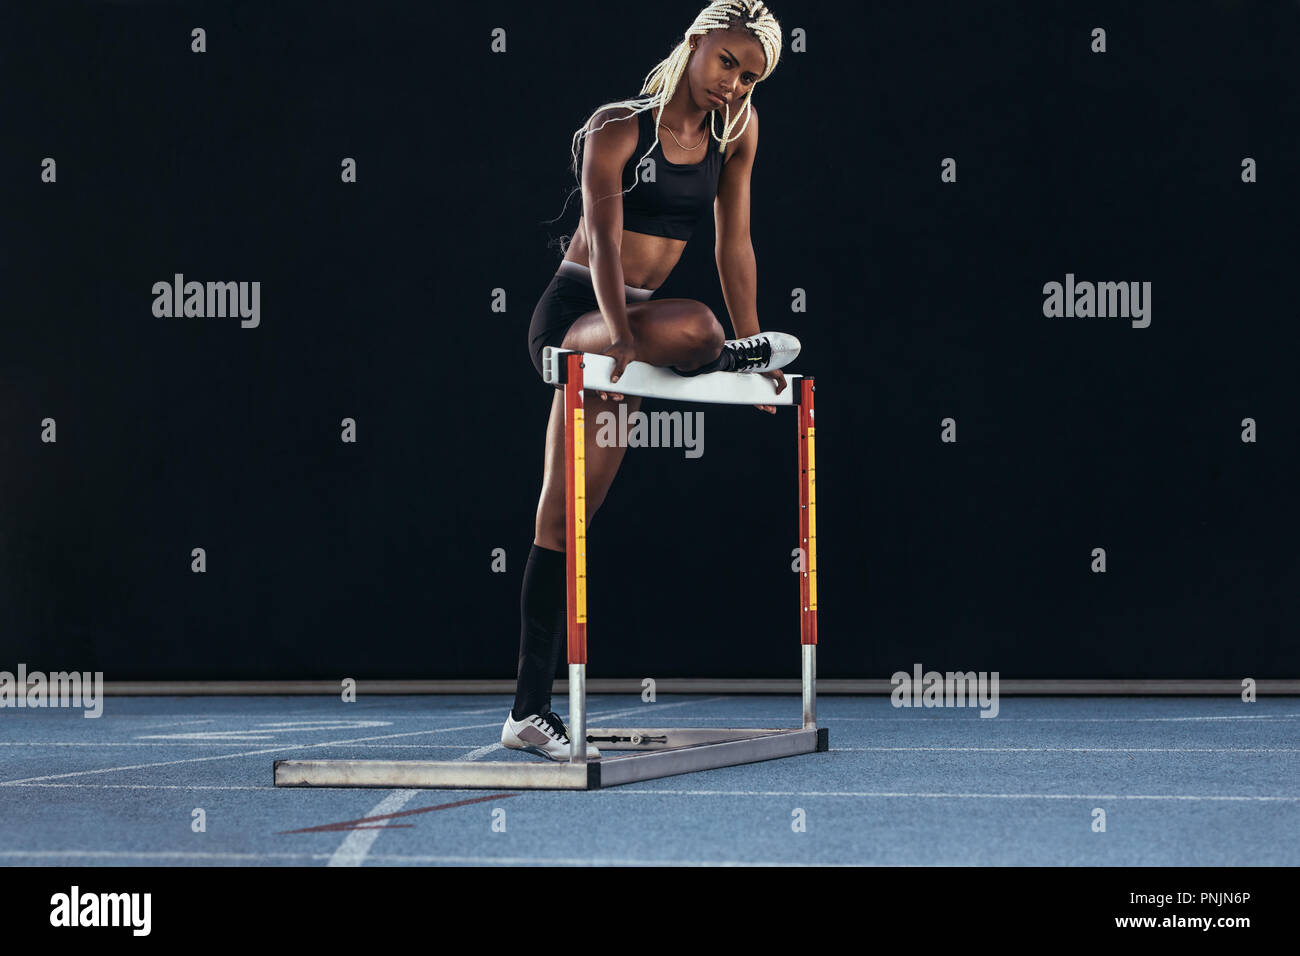 Female athlete standing on a running track resting one leg on a hurdle. Stock Photo